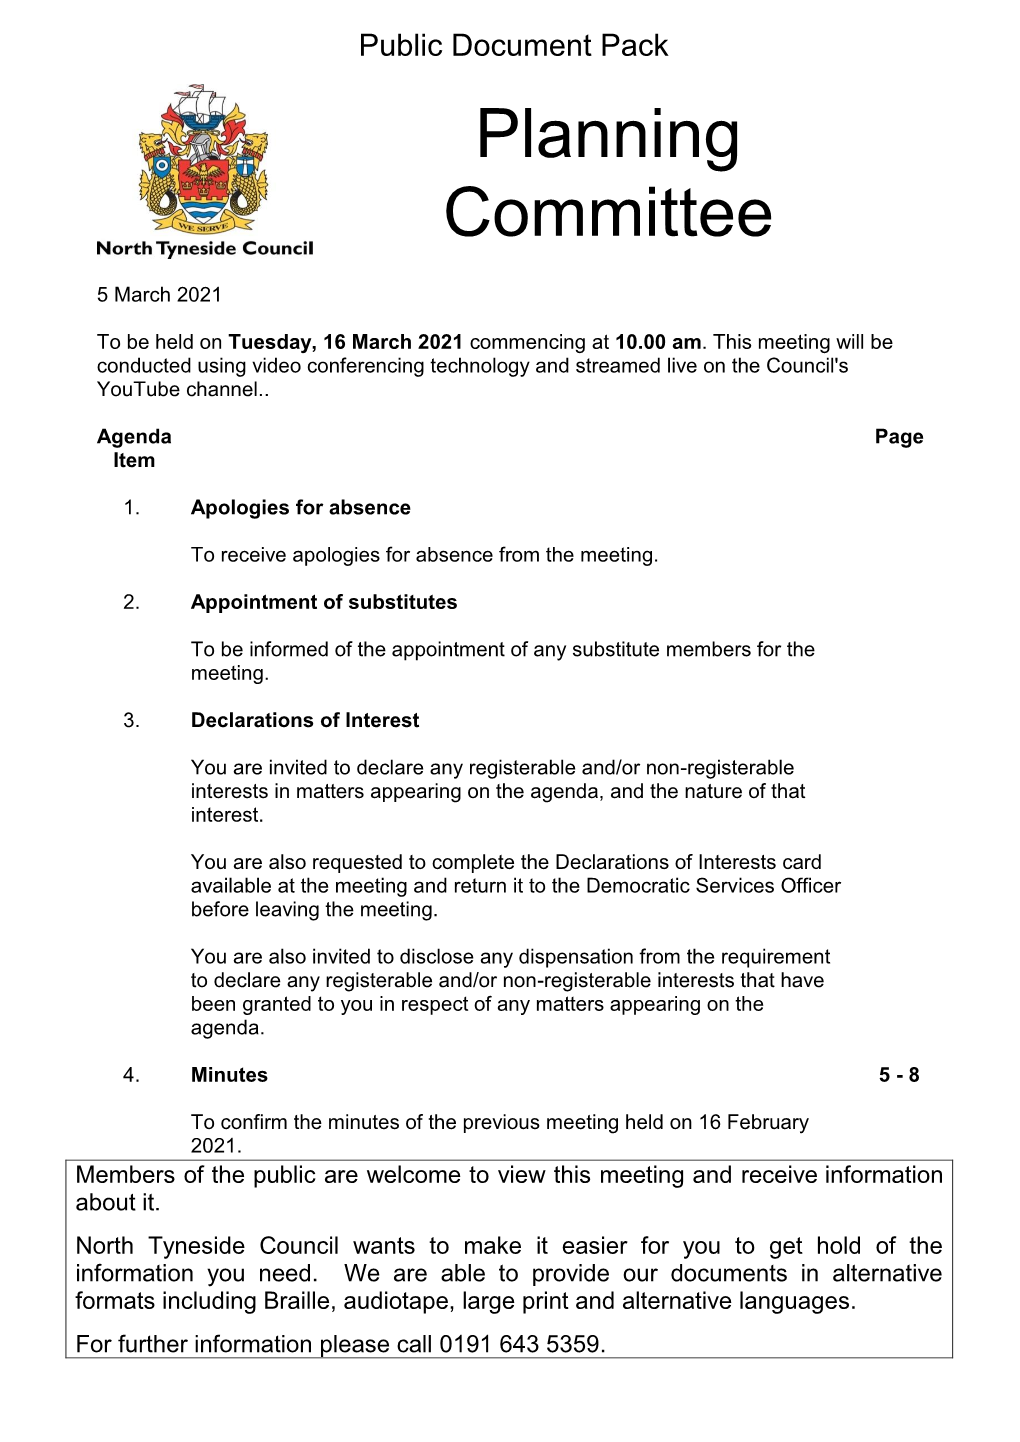 Agenda Document for Planning Committee, 16/03/2021 10:00